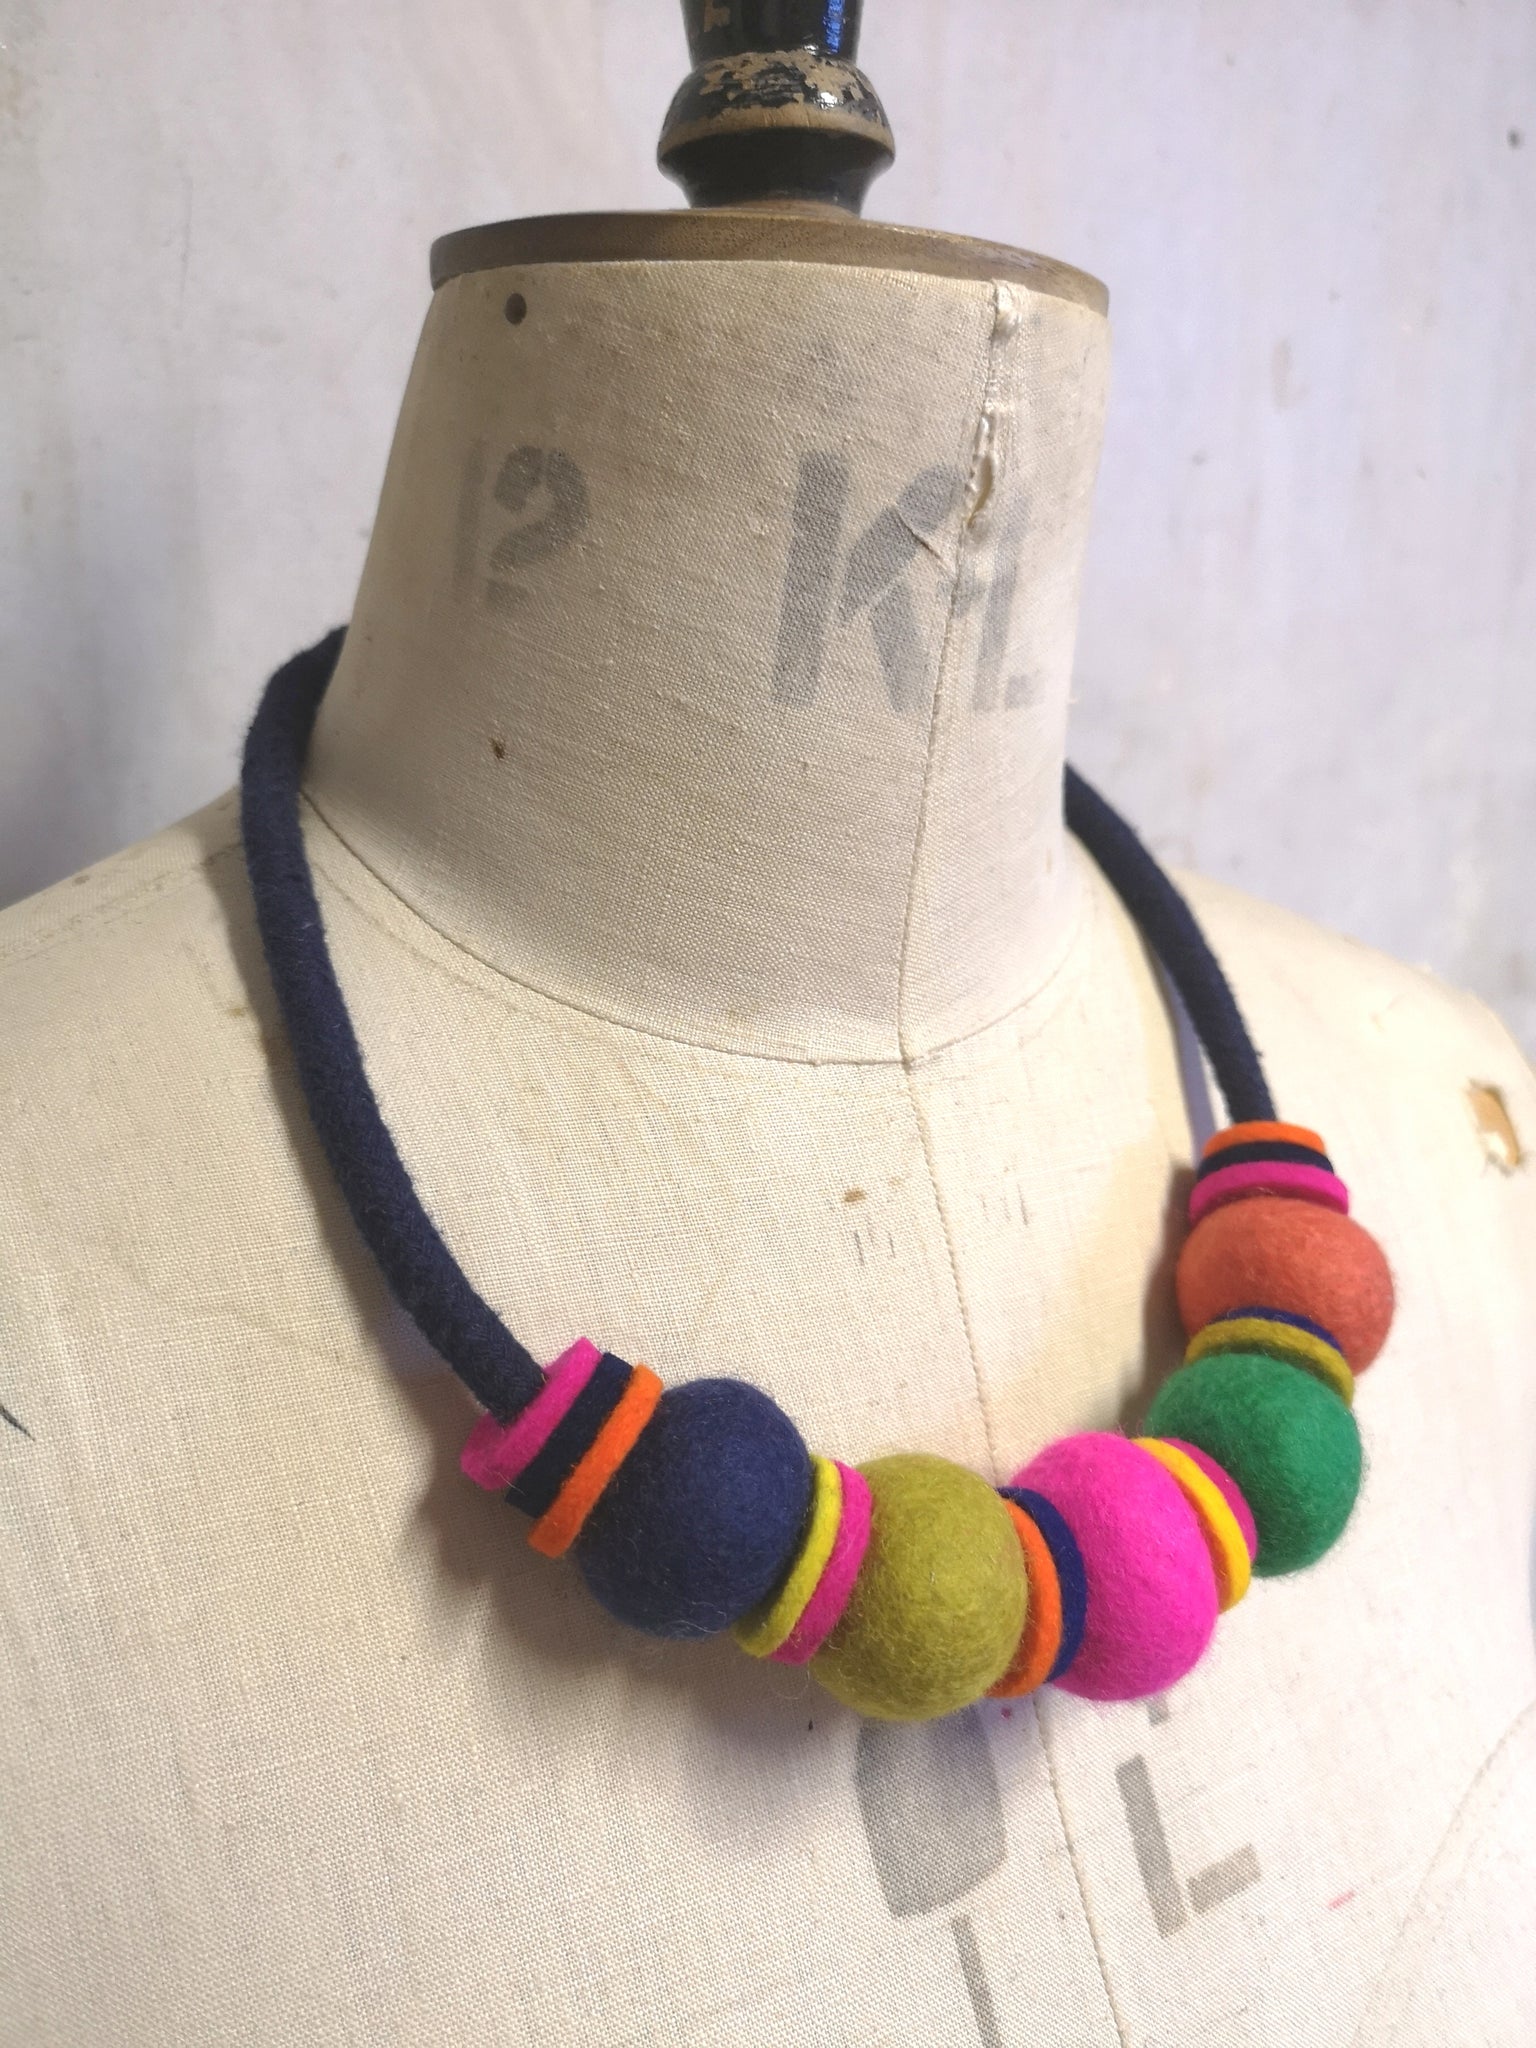 Handmade Merino Beads and Rope Necklace - Multi colour